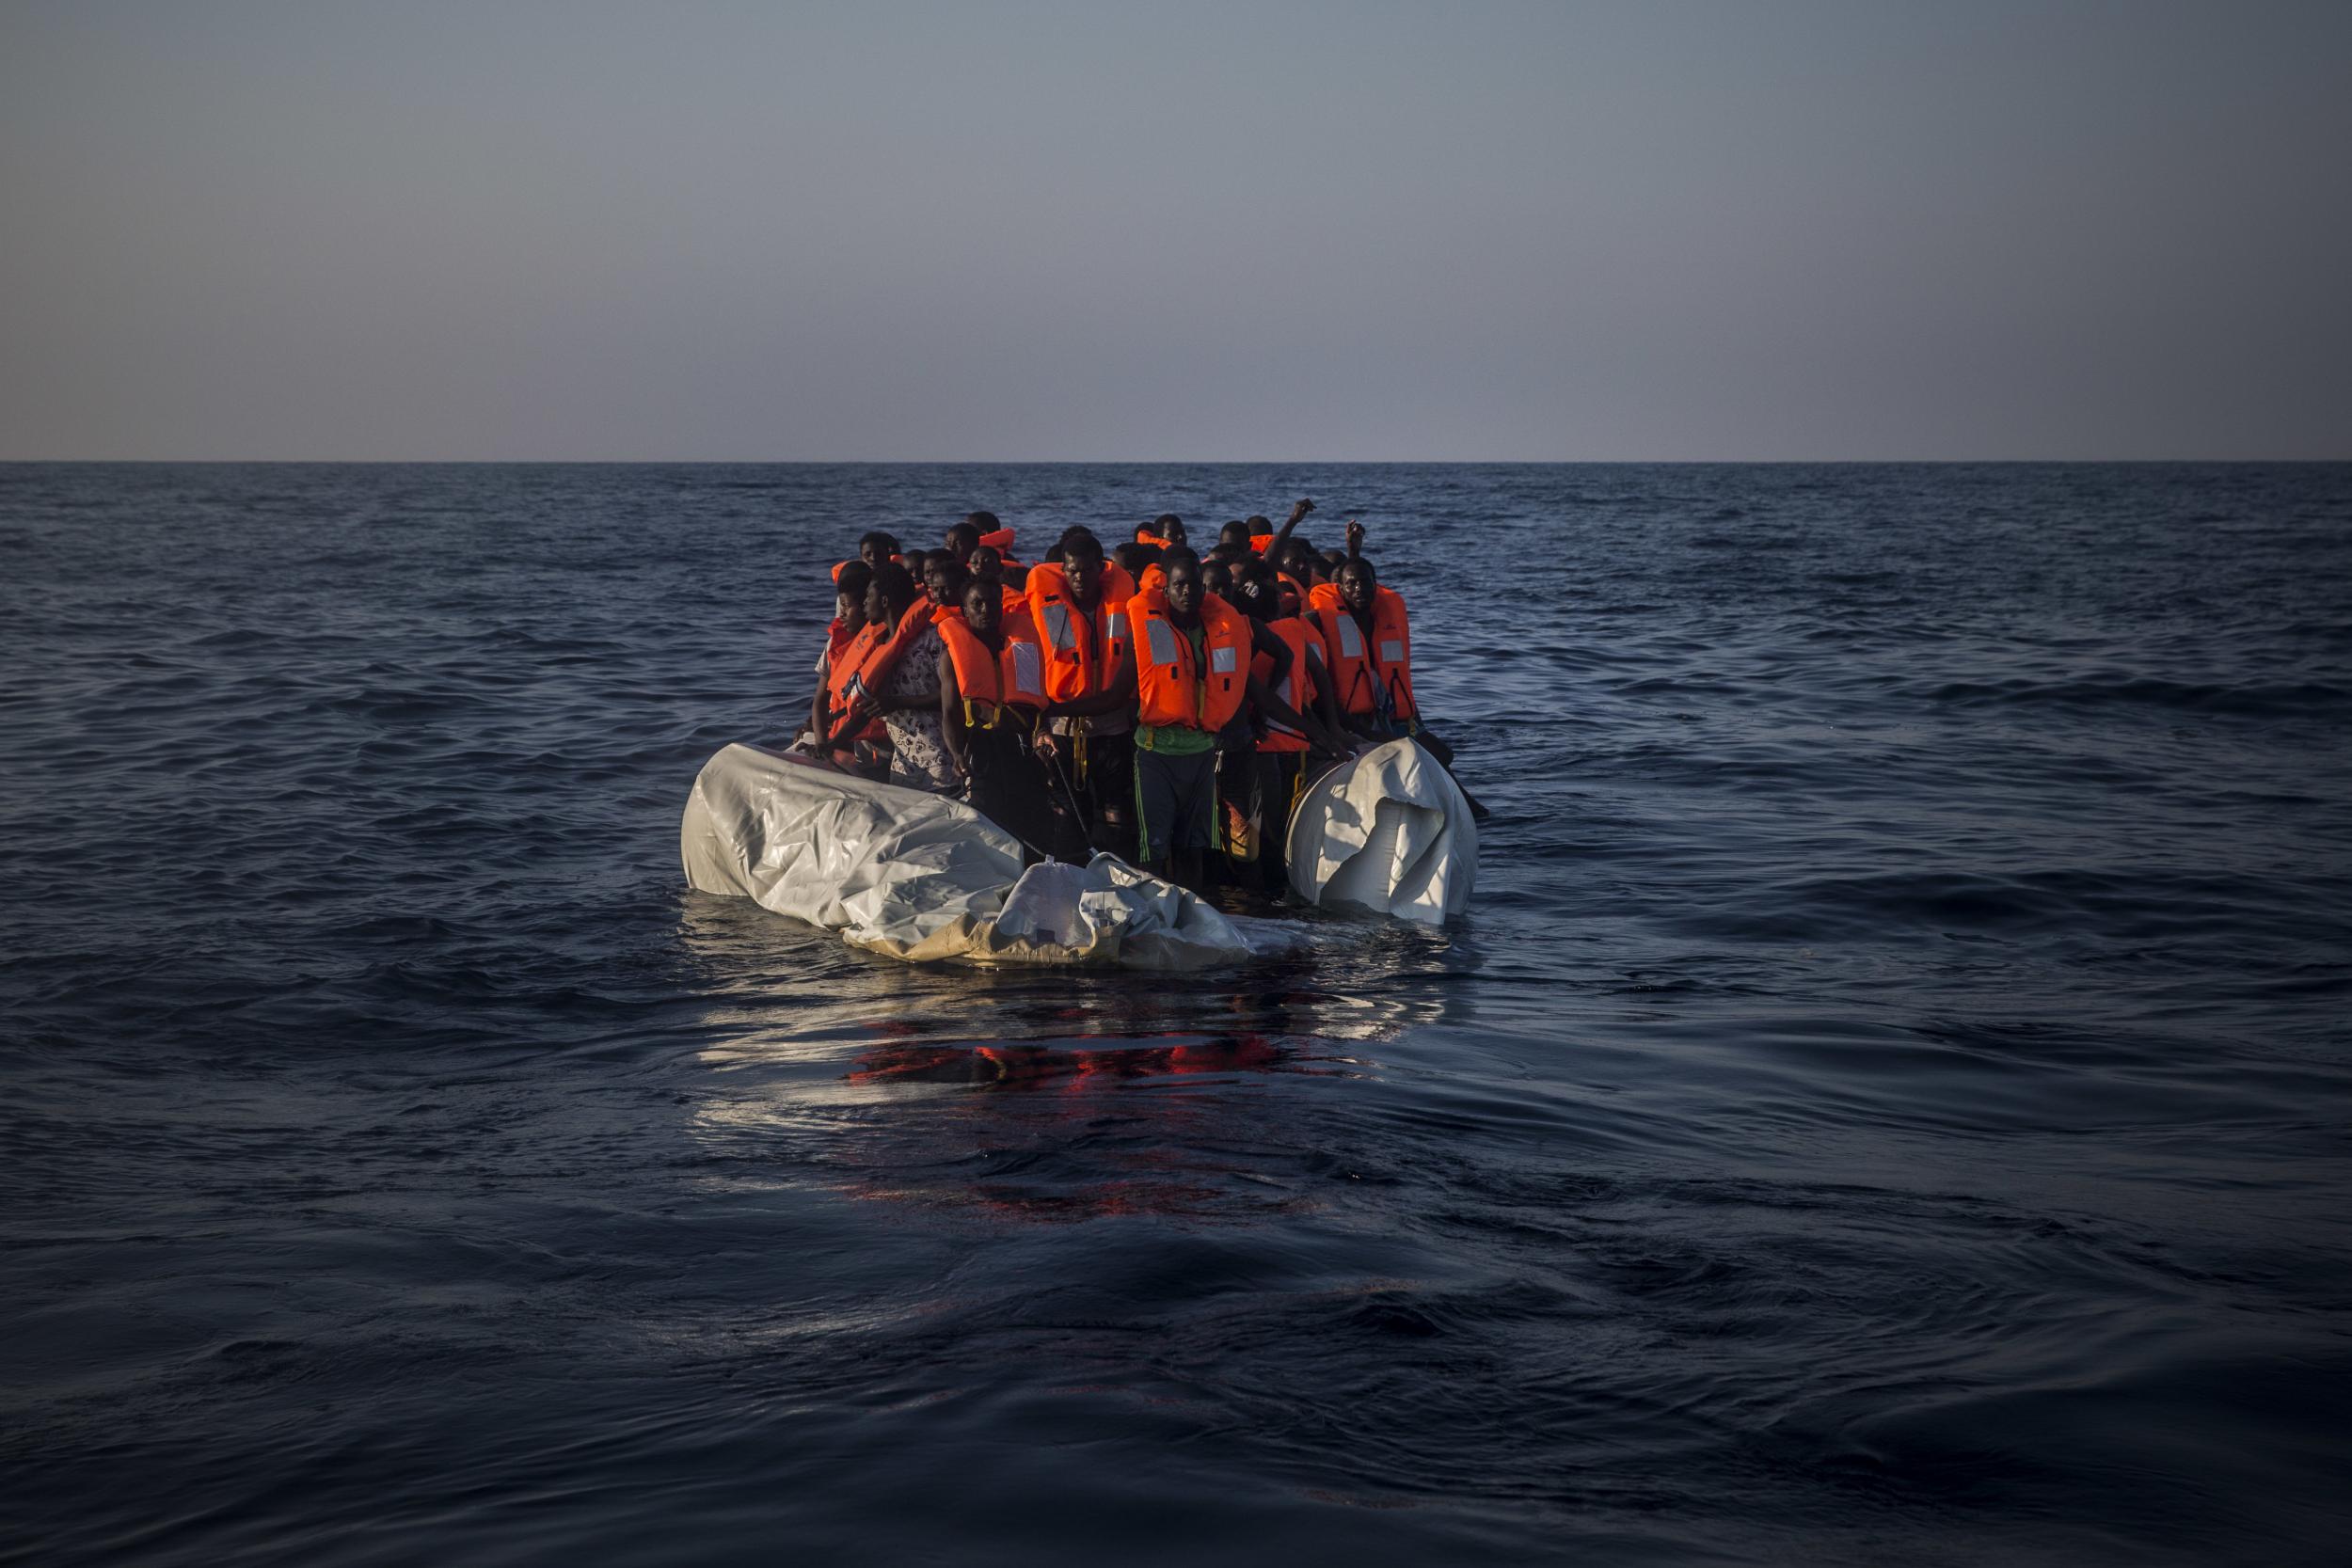 African refugees aboard a partially punctured rubber boat await rescue on the Mediterranean Sea